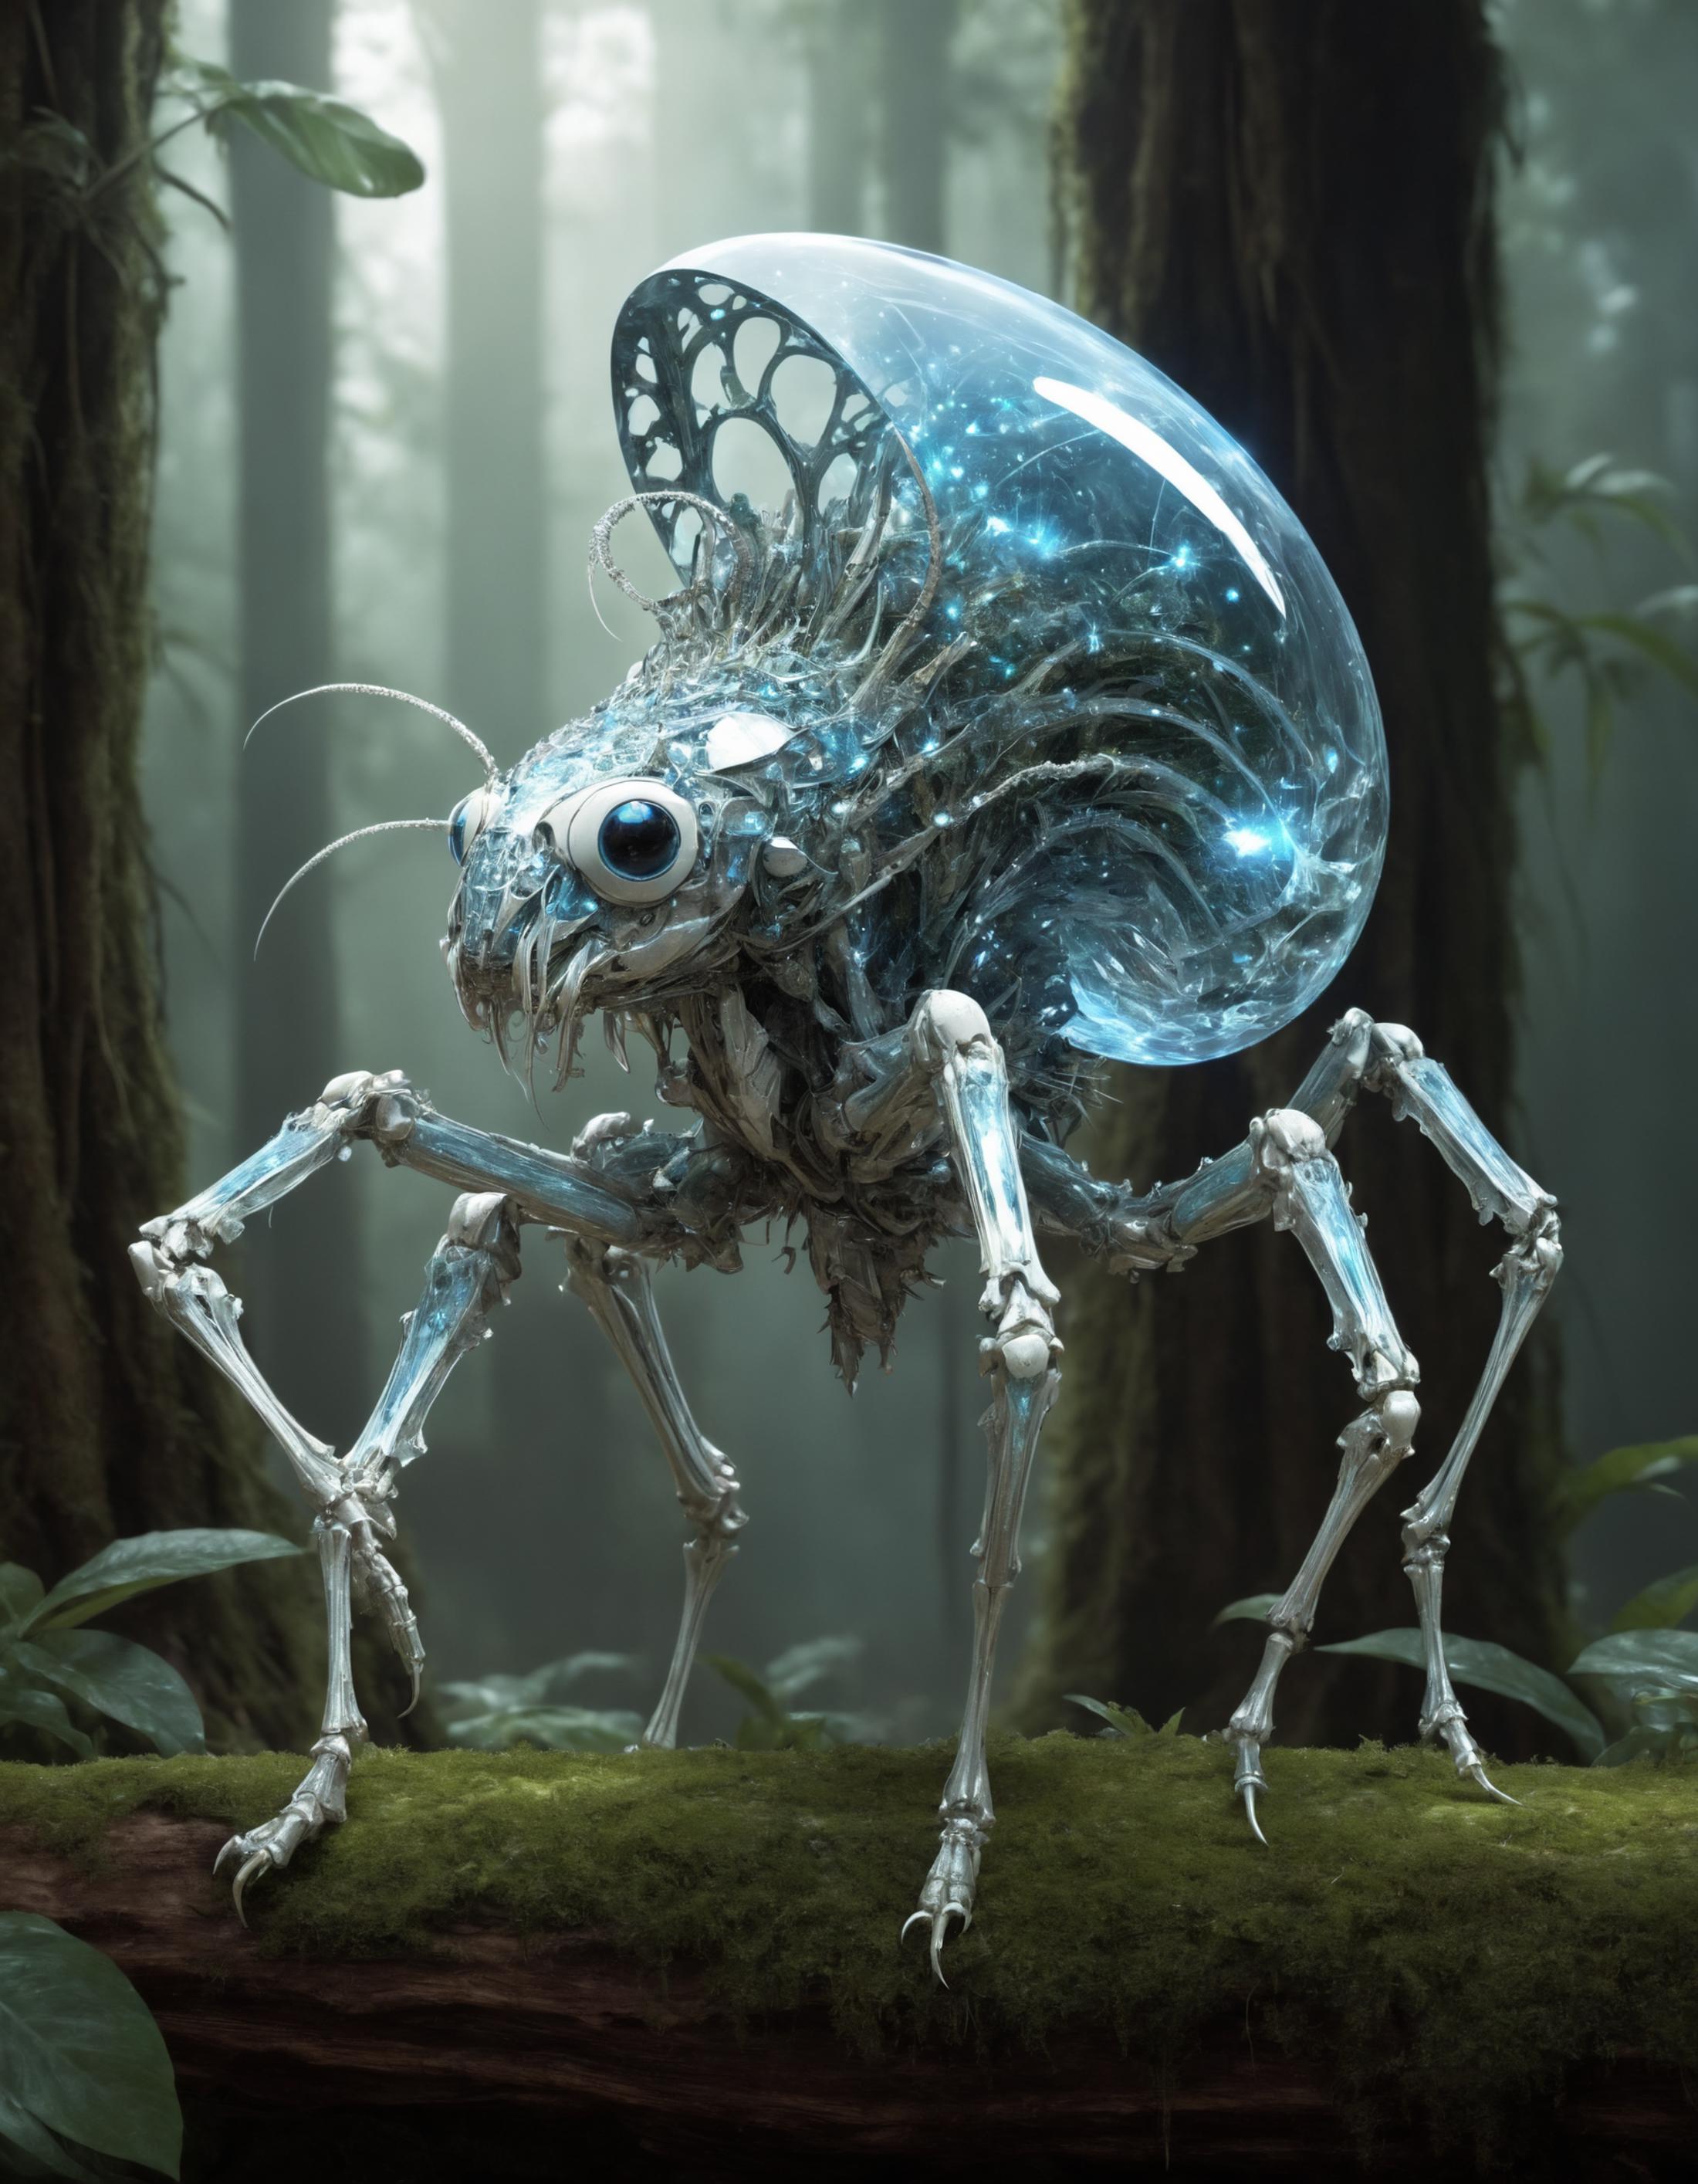 A robotic creature with a glass dome head and a blue eye, standing in a forest.